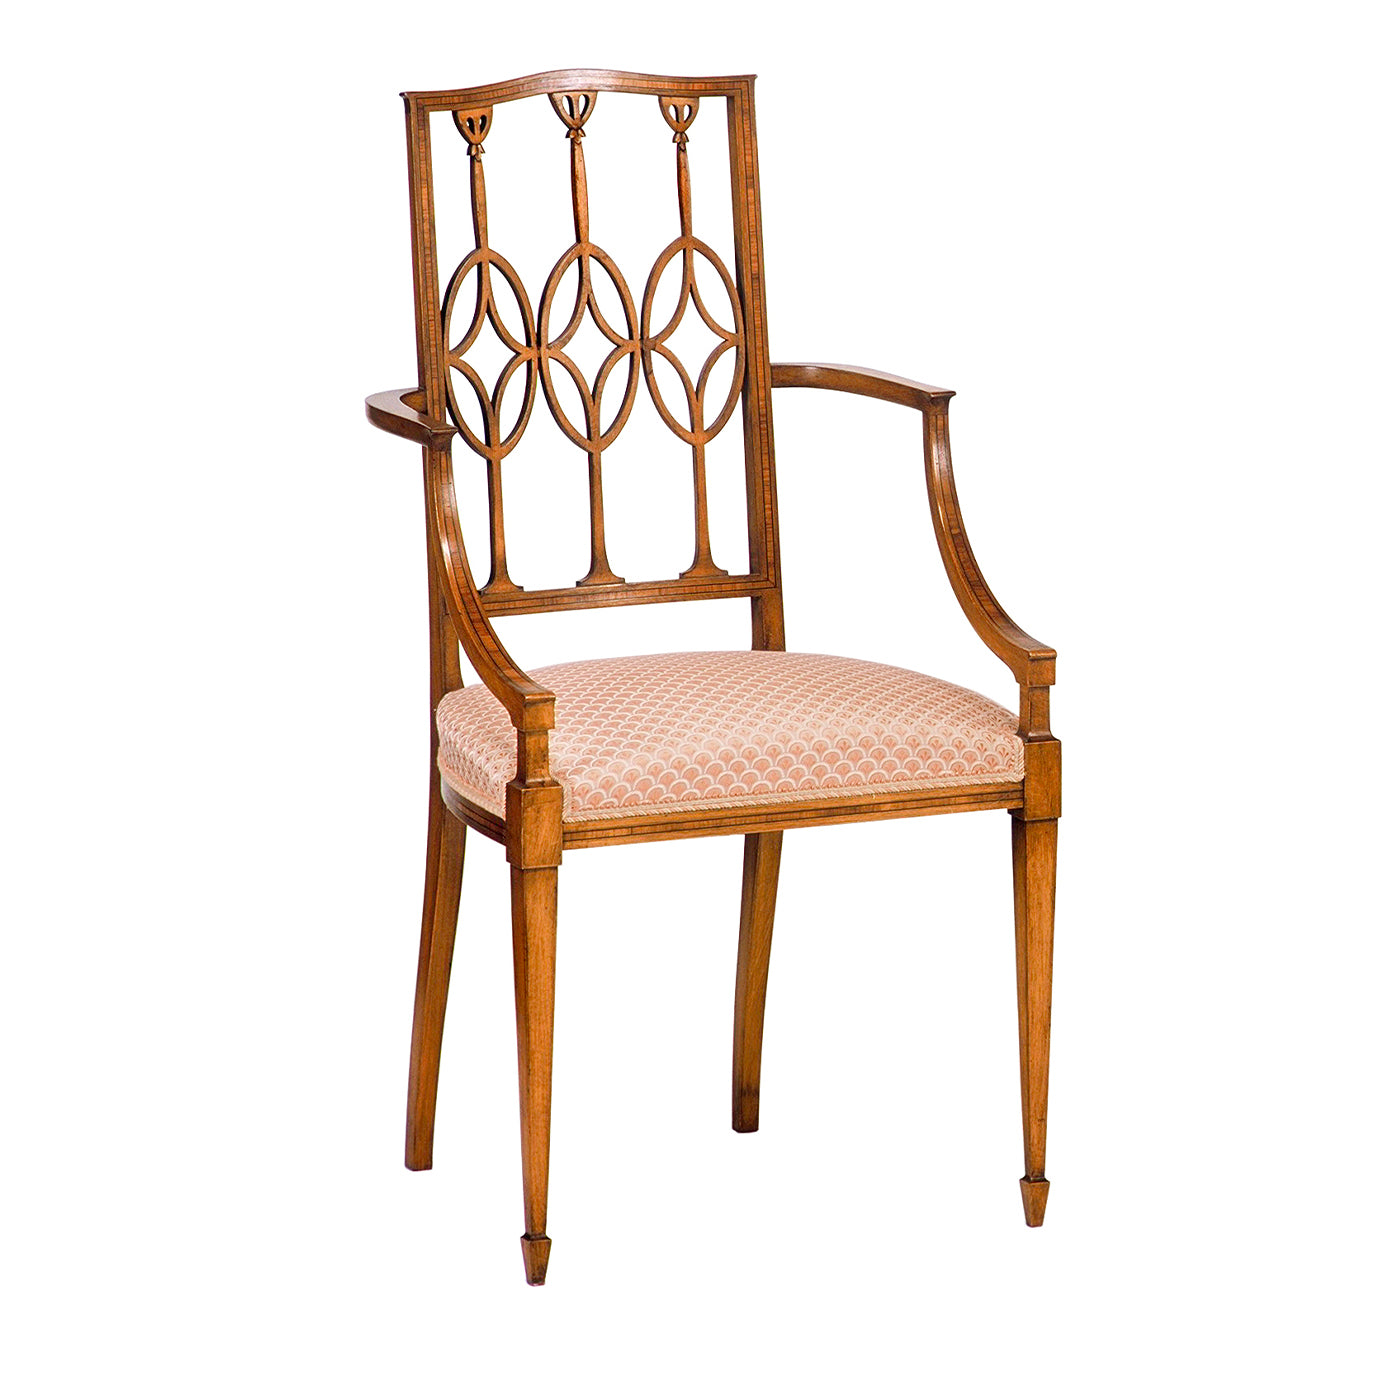 Hepplewhite-Style Rosewood & Beech Chair with Arms - Alternative view 1